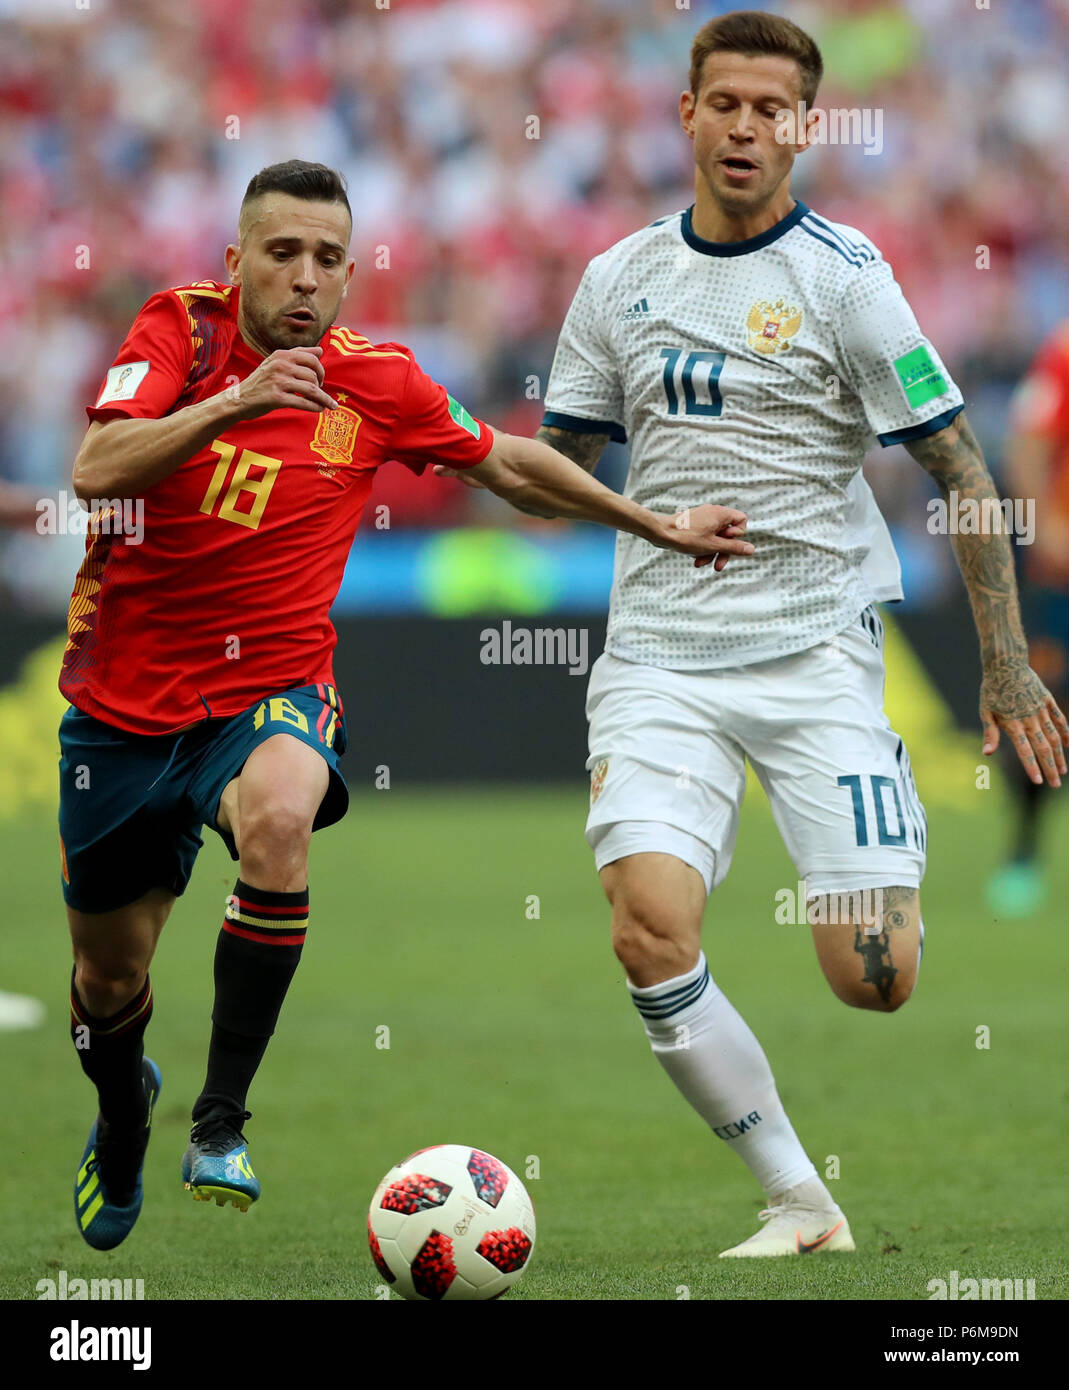 Moscow, Russia. 1st July, 2018. Jordi Alba (L) of Spain vies with Fedor Smolov of Russia during the 2018 FIFA World Cup round of 16 match between Spain and Russia in Moscow, Russia, July 1, 2018. Credit: Yang Lei/Xinhua/Alamy Live News Stock Photo